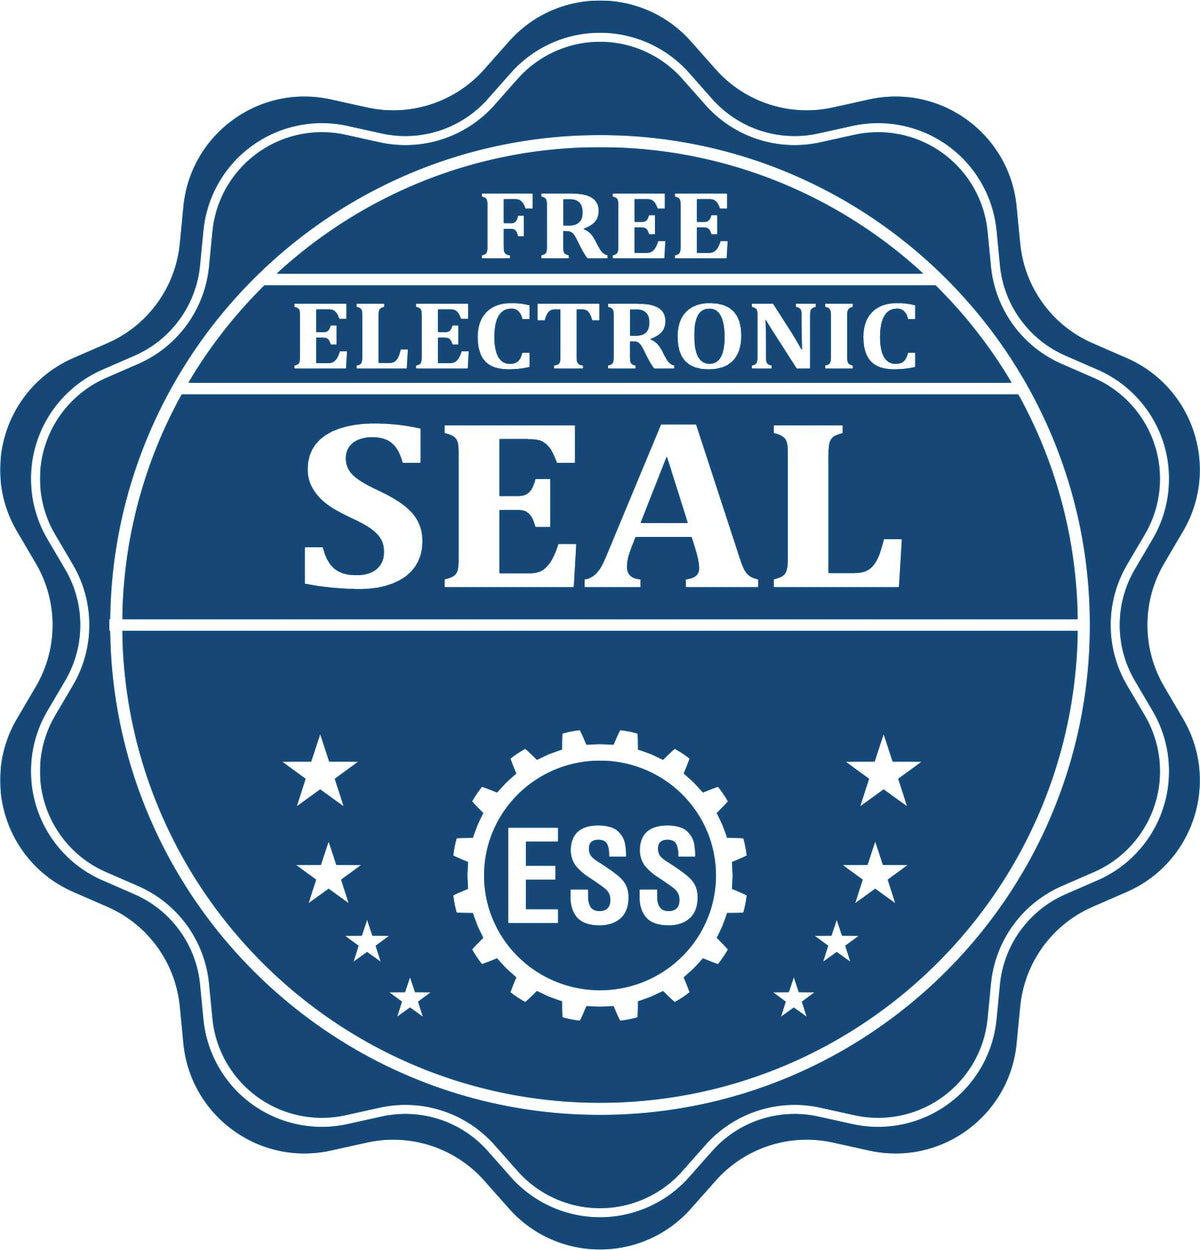 A badge showing a free electronic seal for the Hybrid Georgia Engineer Seal with stars and the ESS gear on the emblem.